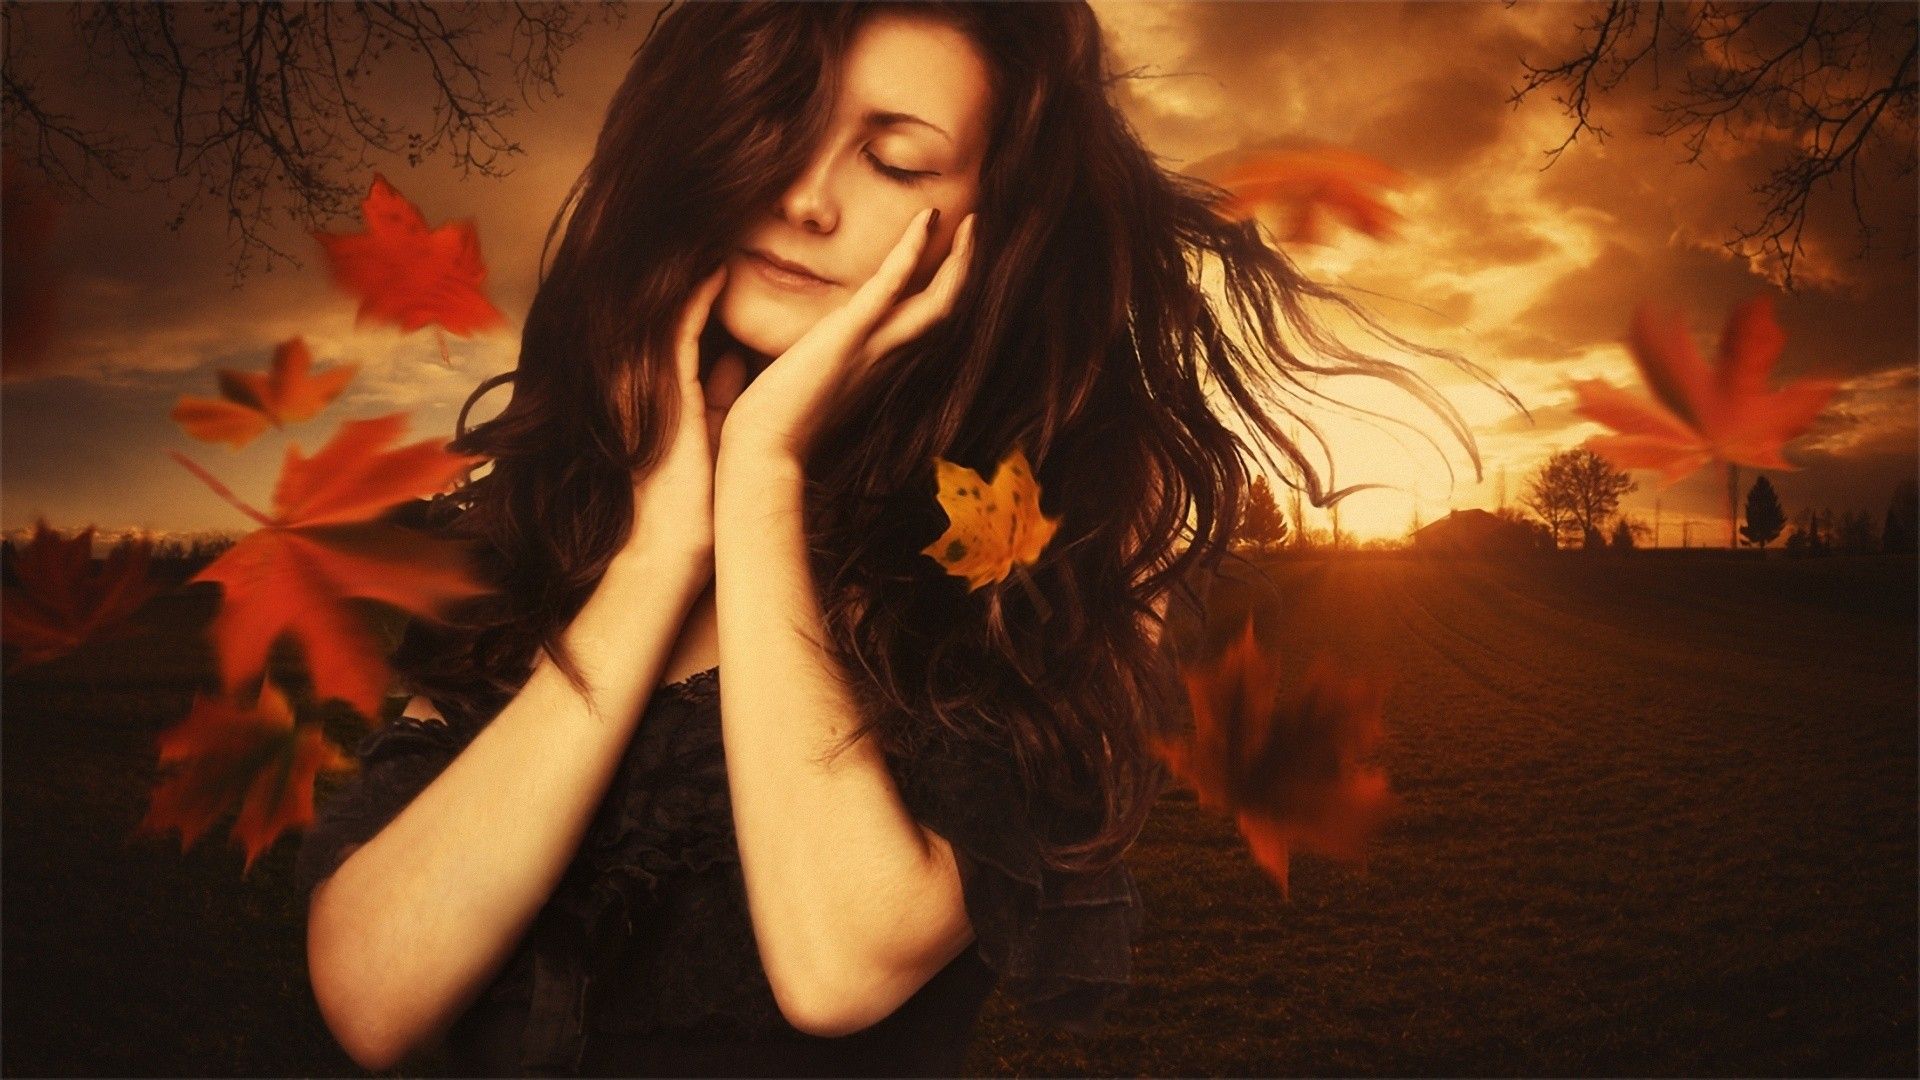 Woman enjoying autumn wallpaper and image, picture, photo